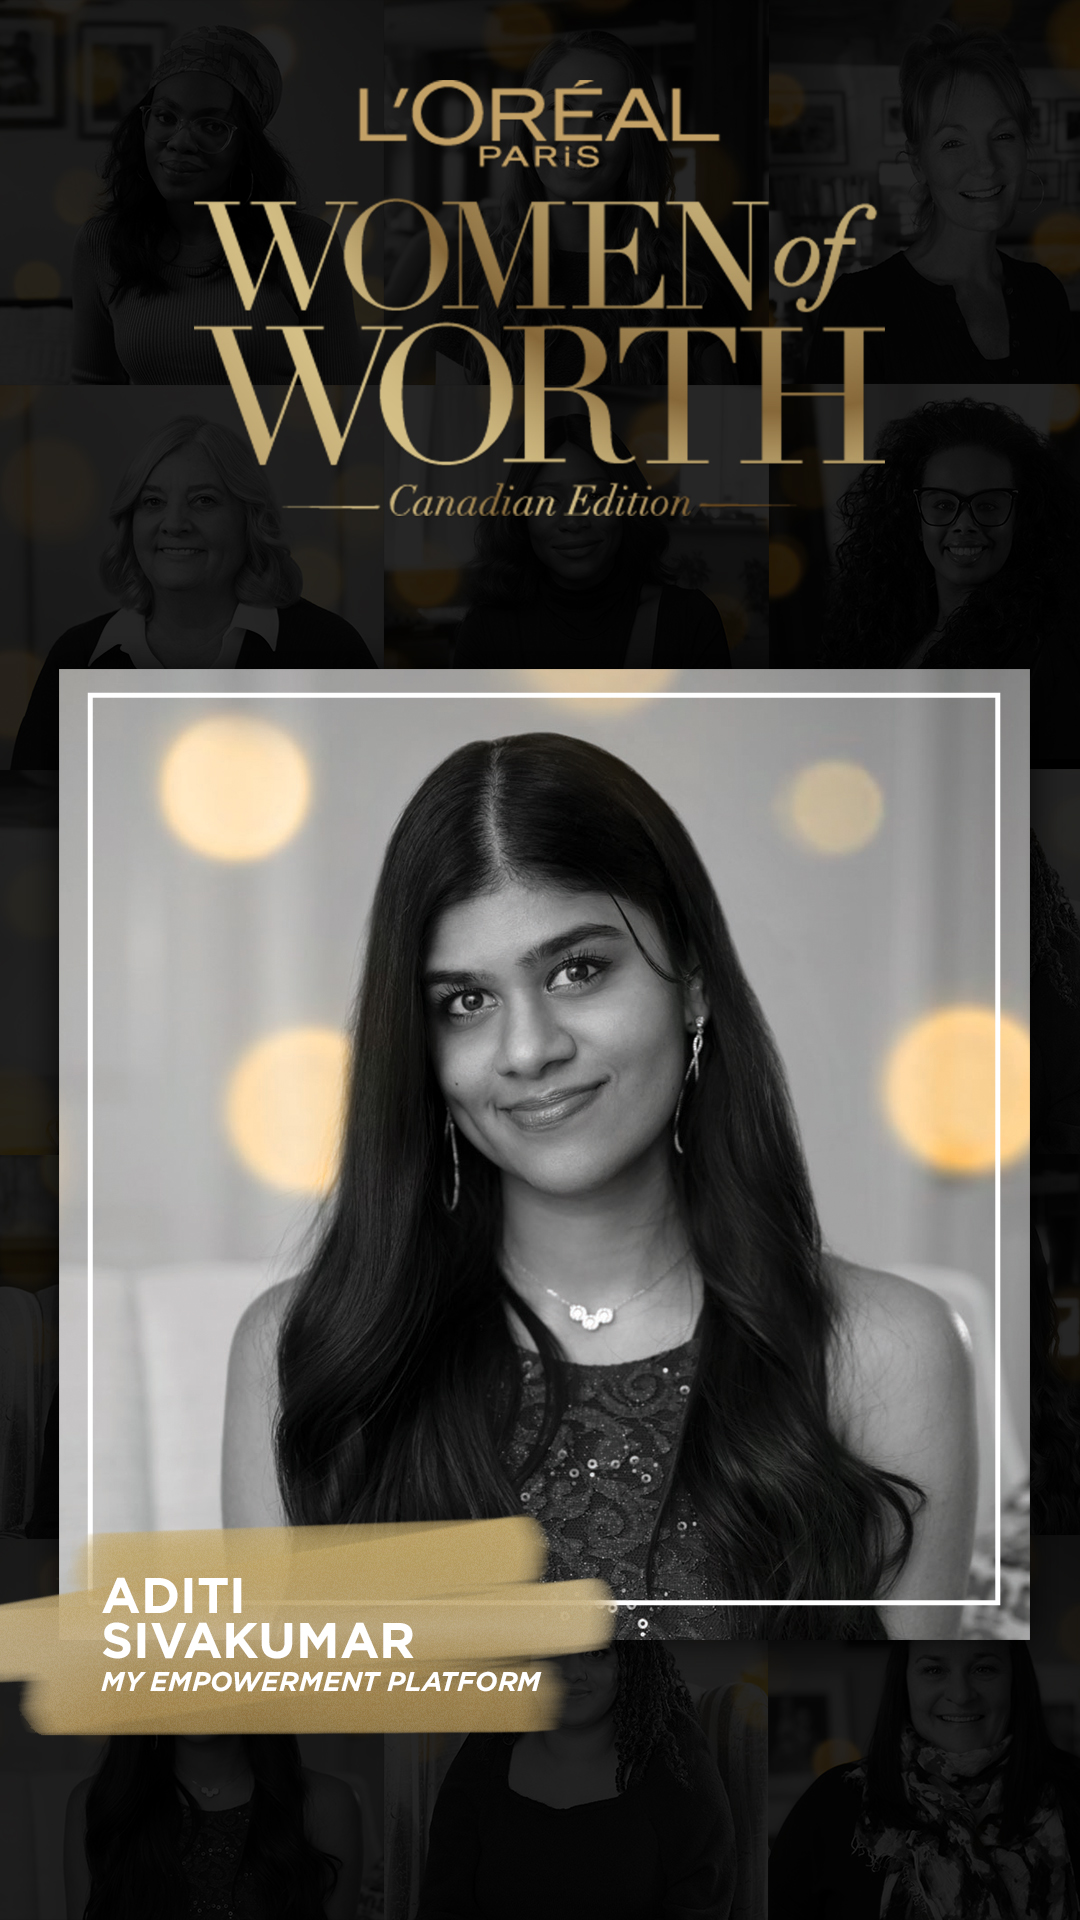 L'Oréal Paris Women Of Worth Awards 2021: How Aditi Sivakumar Created A Digital Platform To Help Victims Of Gender-Based Violence During The Pandemic